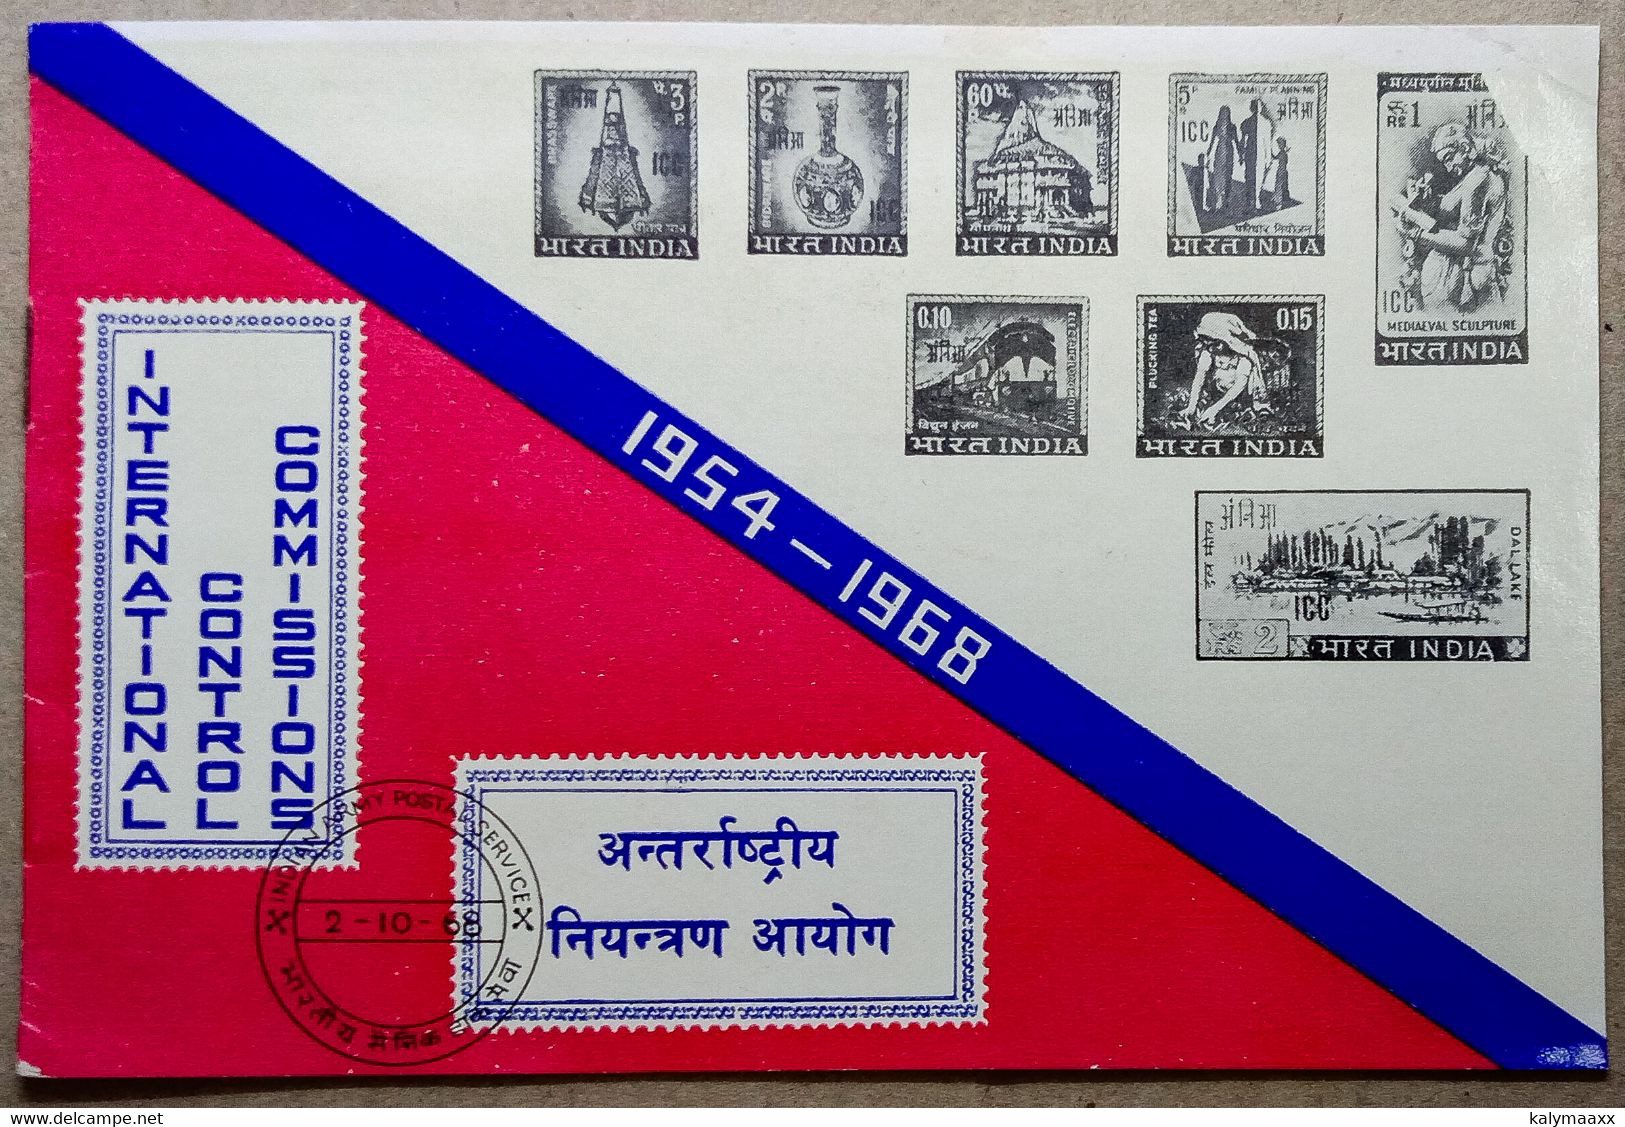 INDIA 1968 ICC OVERPRINTED COMPLETE SET OF 2 F.P.O CANCELLED COVERS & INFORMATION BROCHURE, VIETNAM, LAOS, CAMBODIA - Franchigia Militare